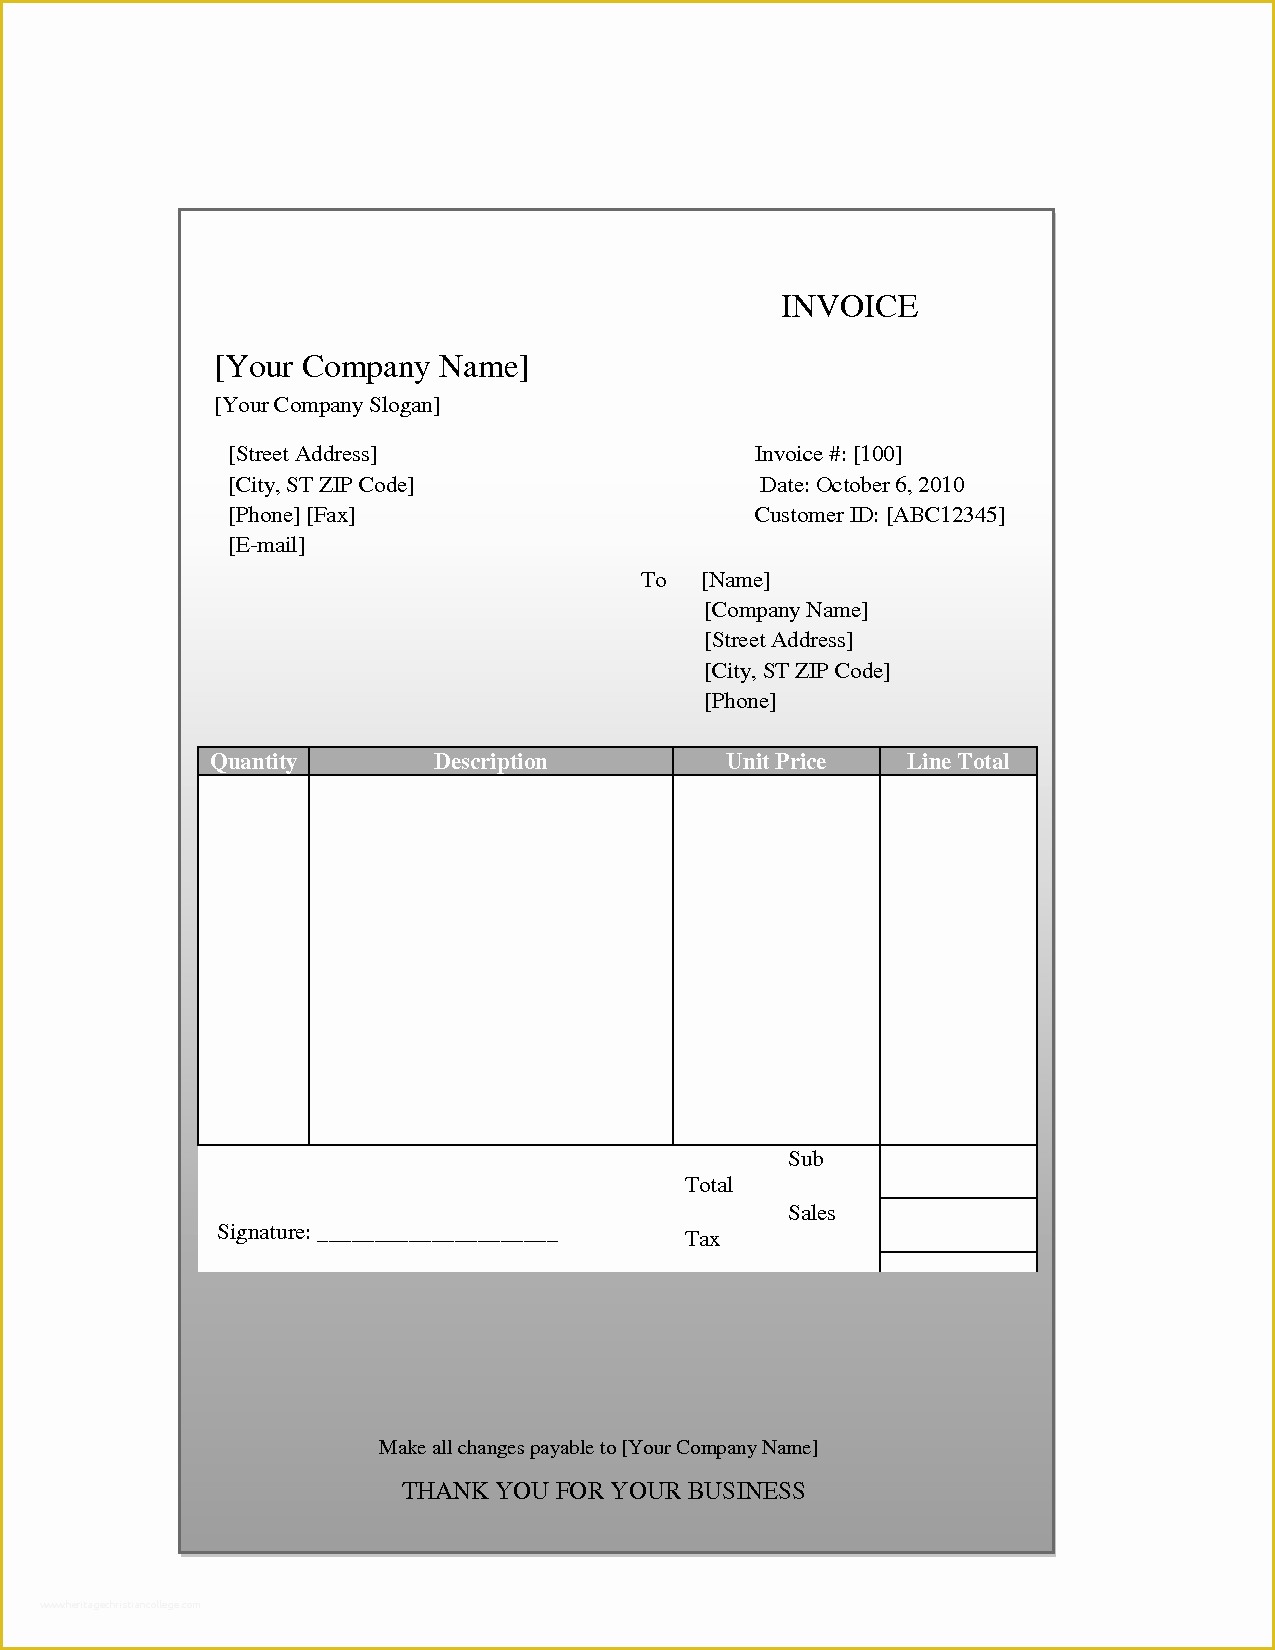 Invoice Template Mac Free Download Of Word Invoice Template Mac Heritagechristiancollege